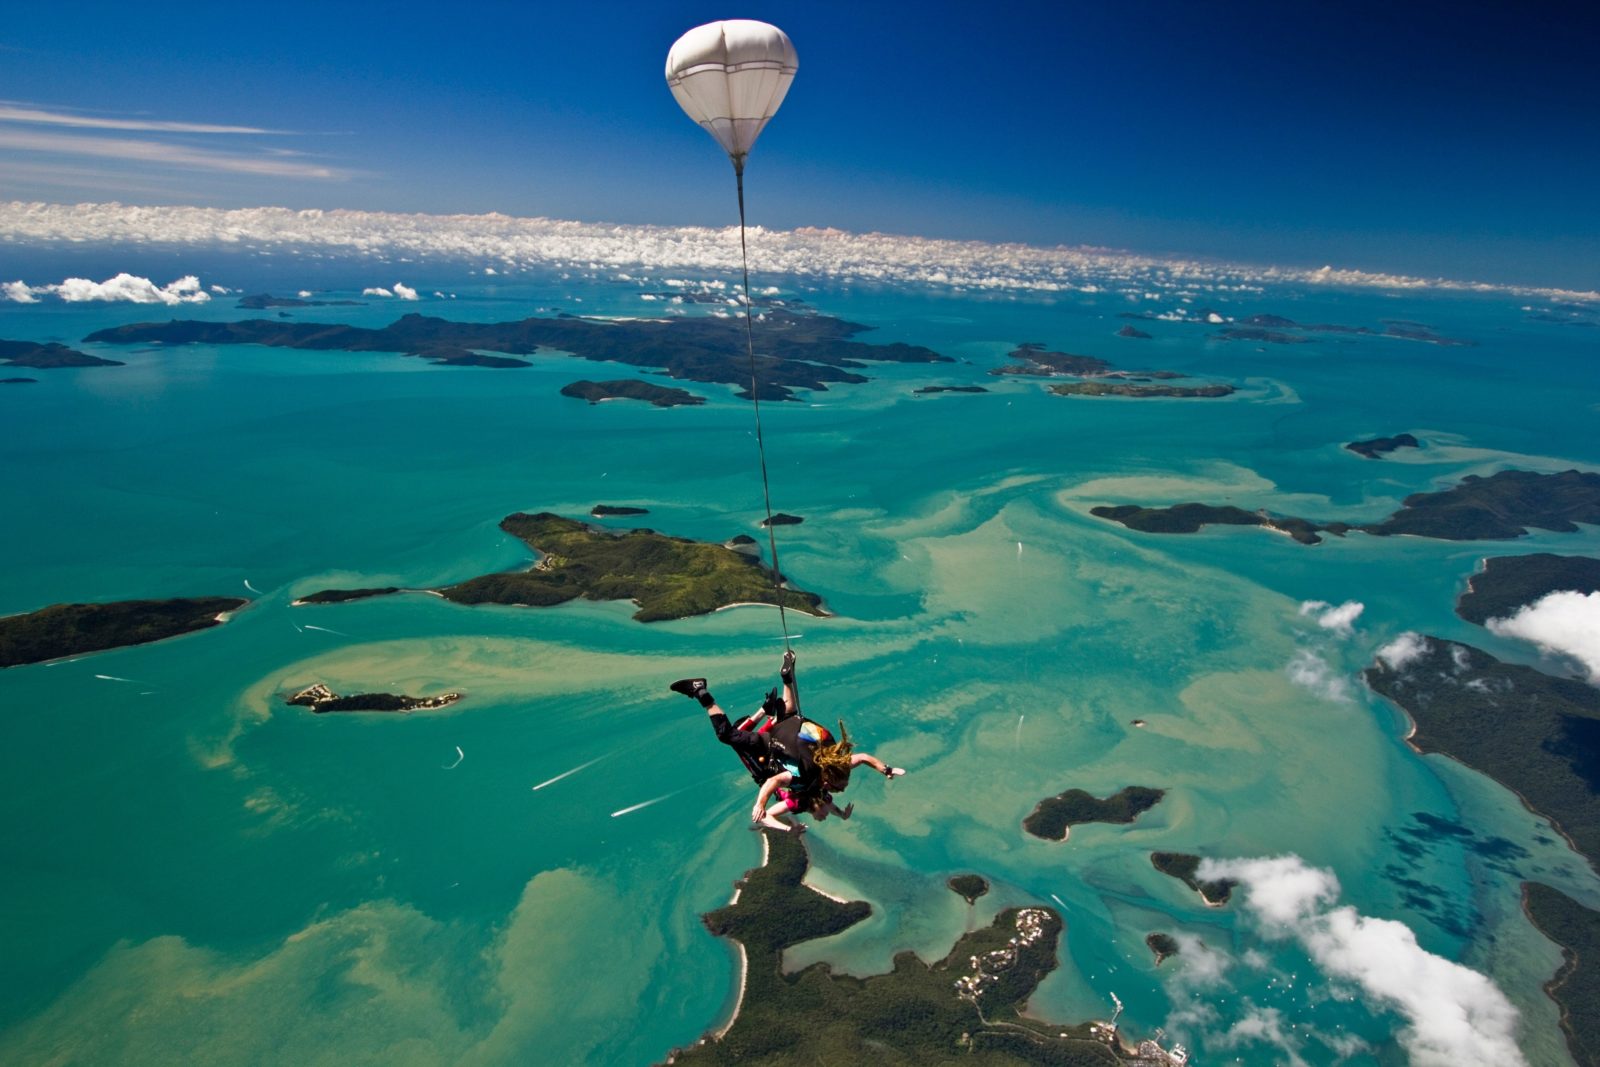 Skydive over Airlie Beach and the Whitsundays islands!